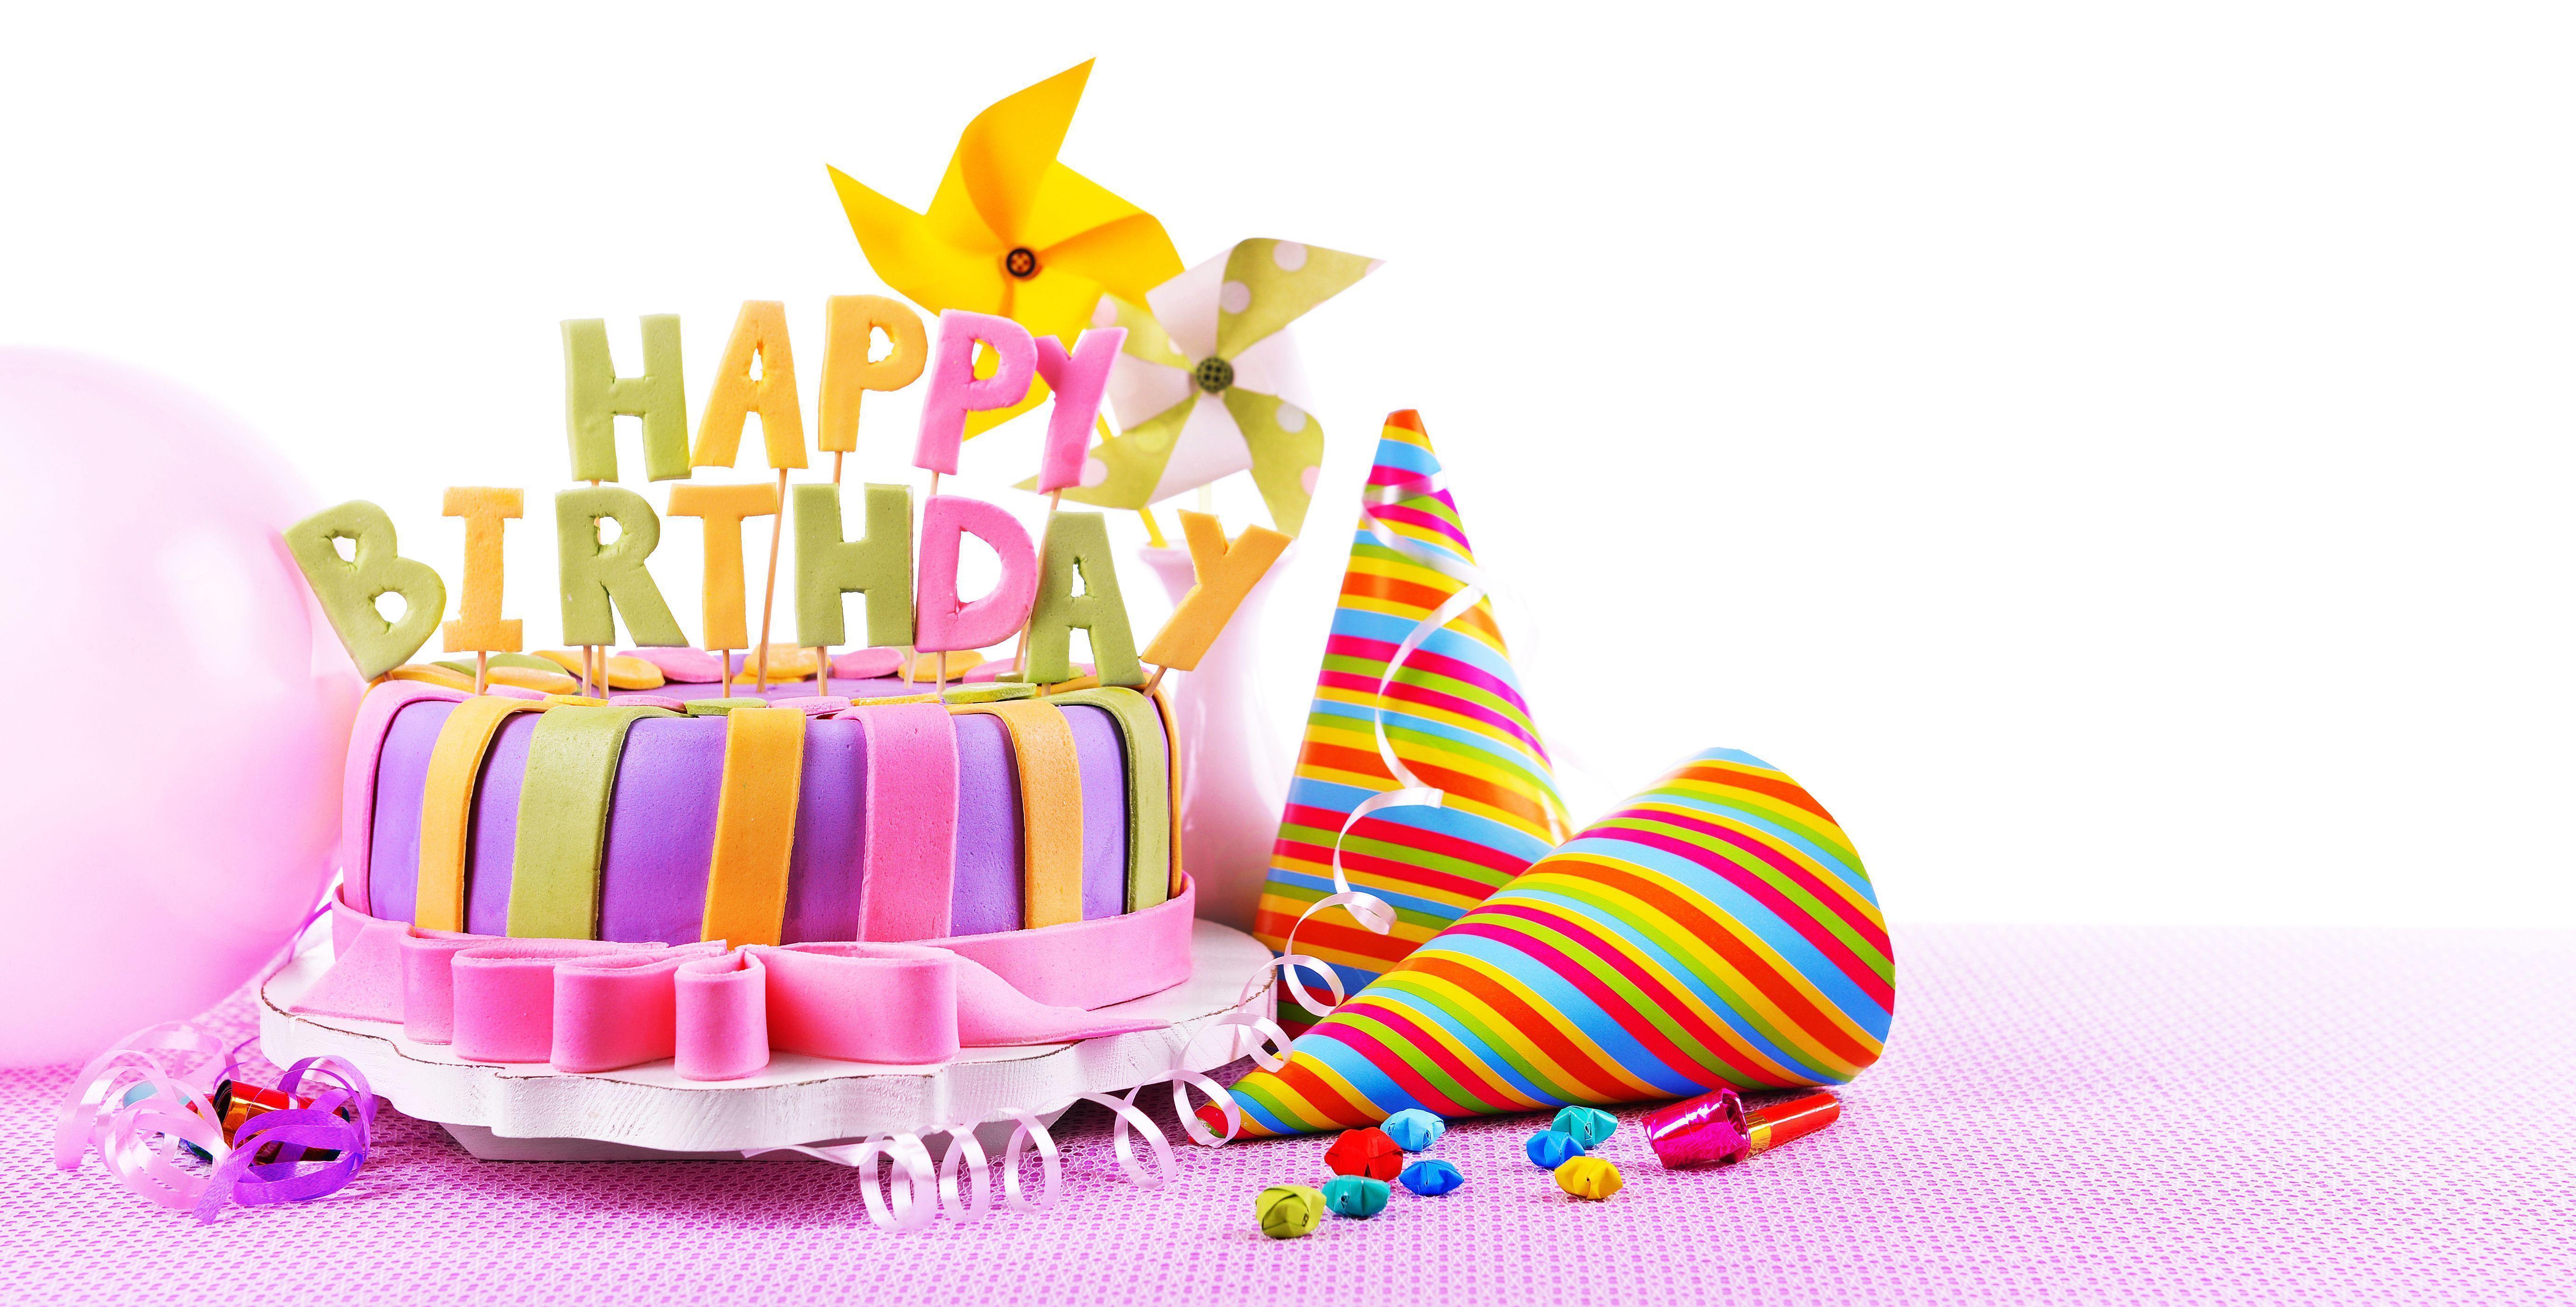 Birthday Cakes Wallpapers - Wp2039525